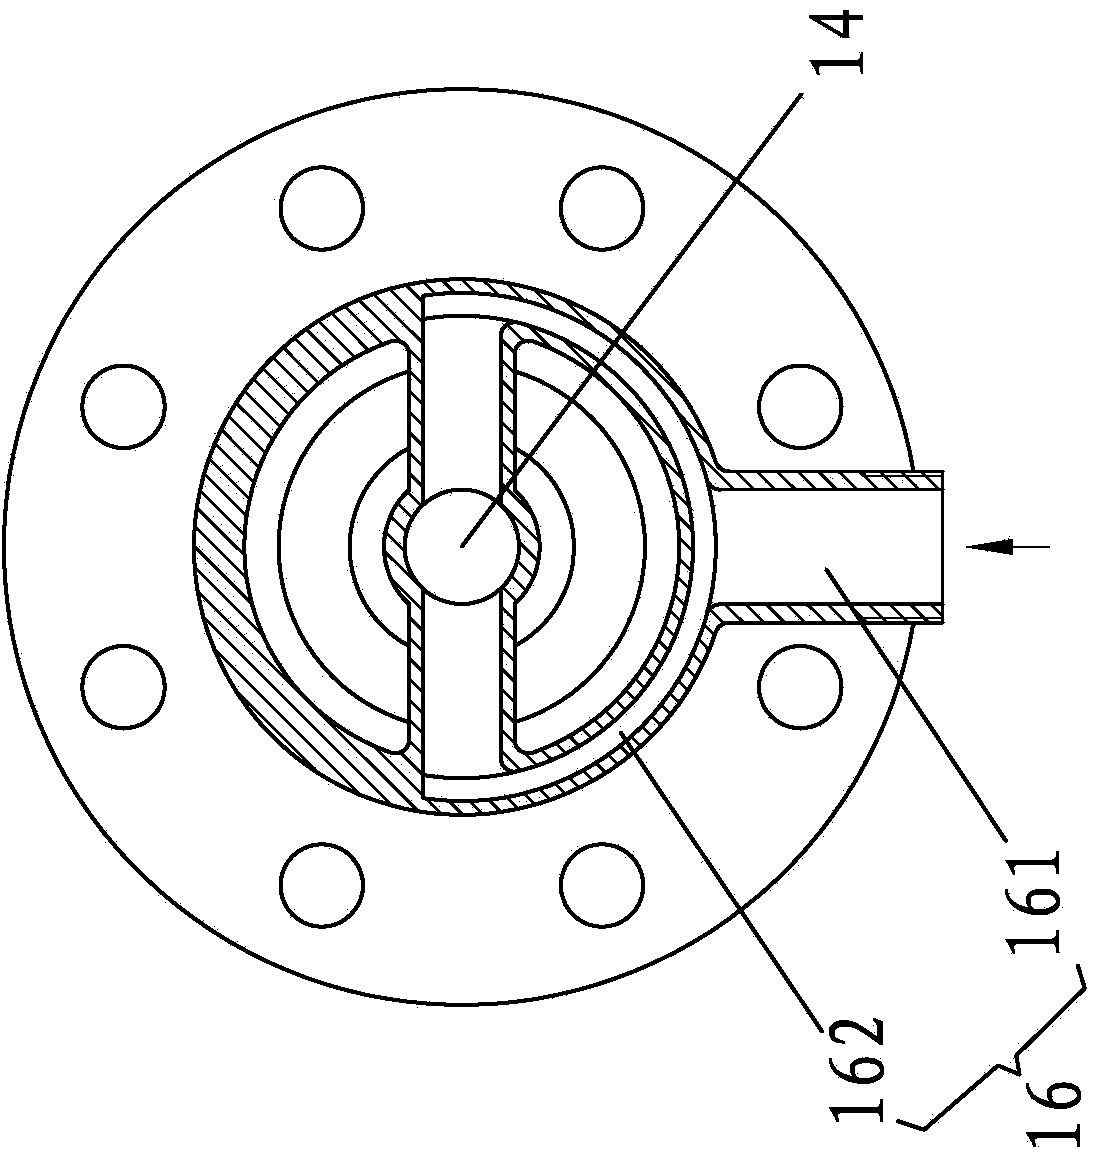 Spiral flow mixer for positive pressure metering injection type proportionally-mixing device